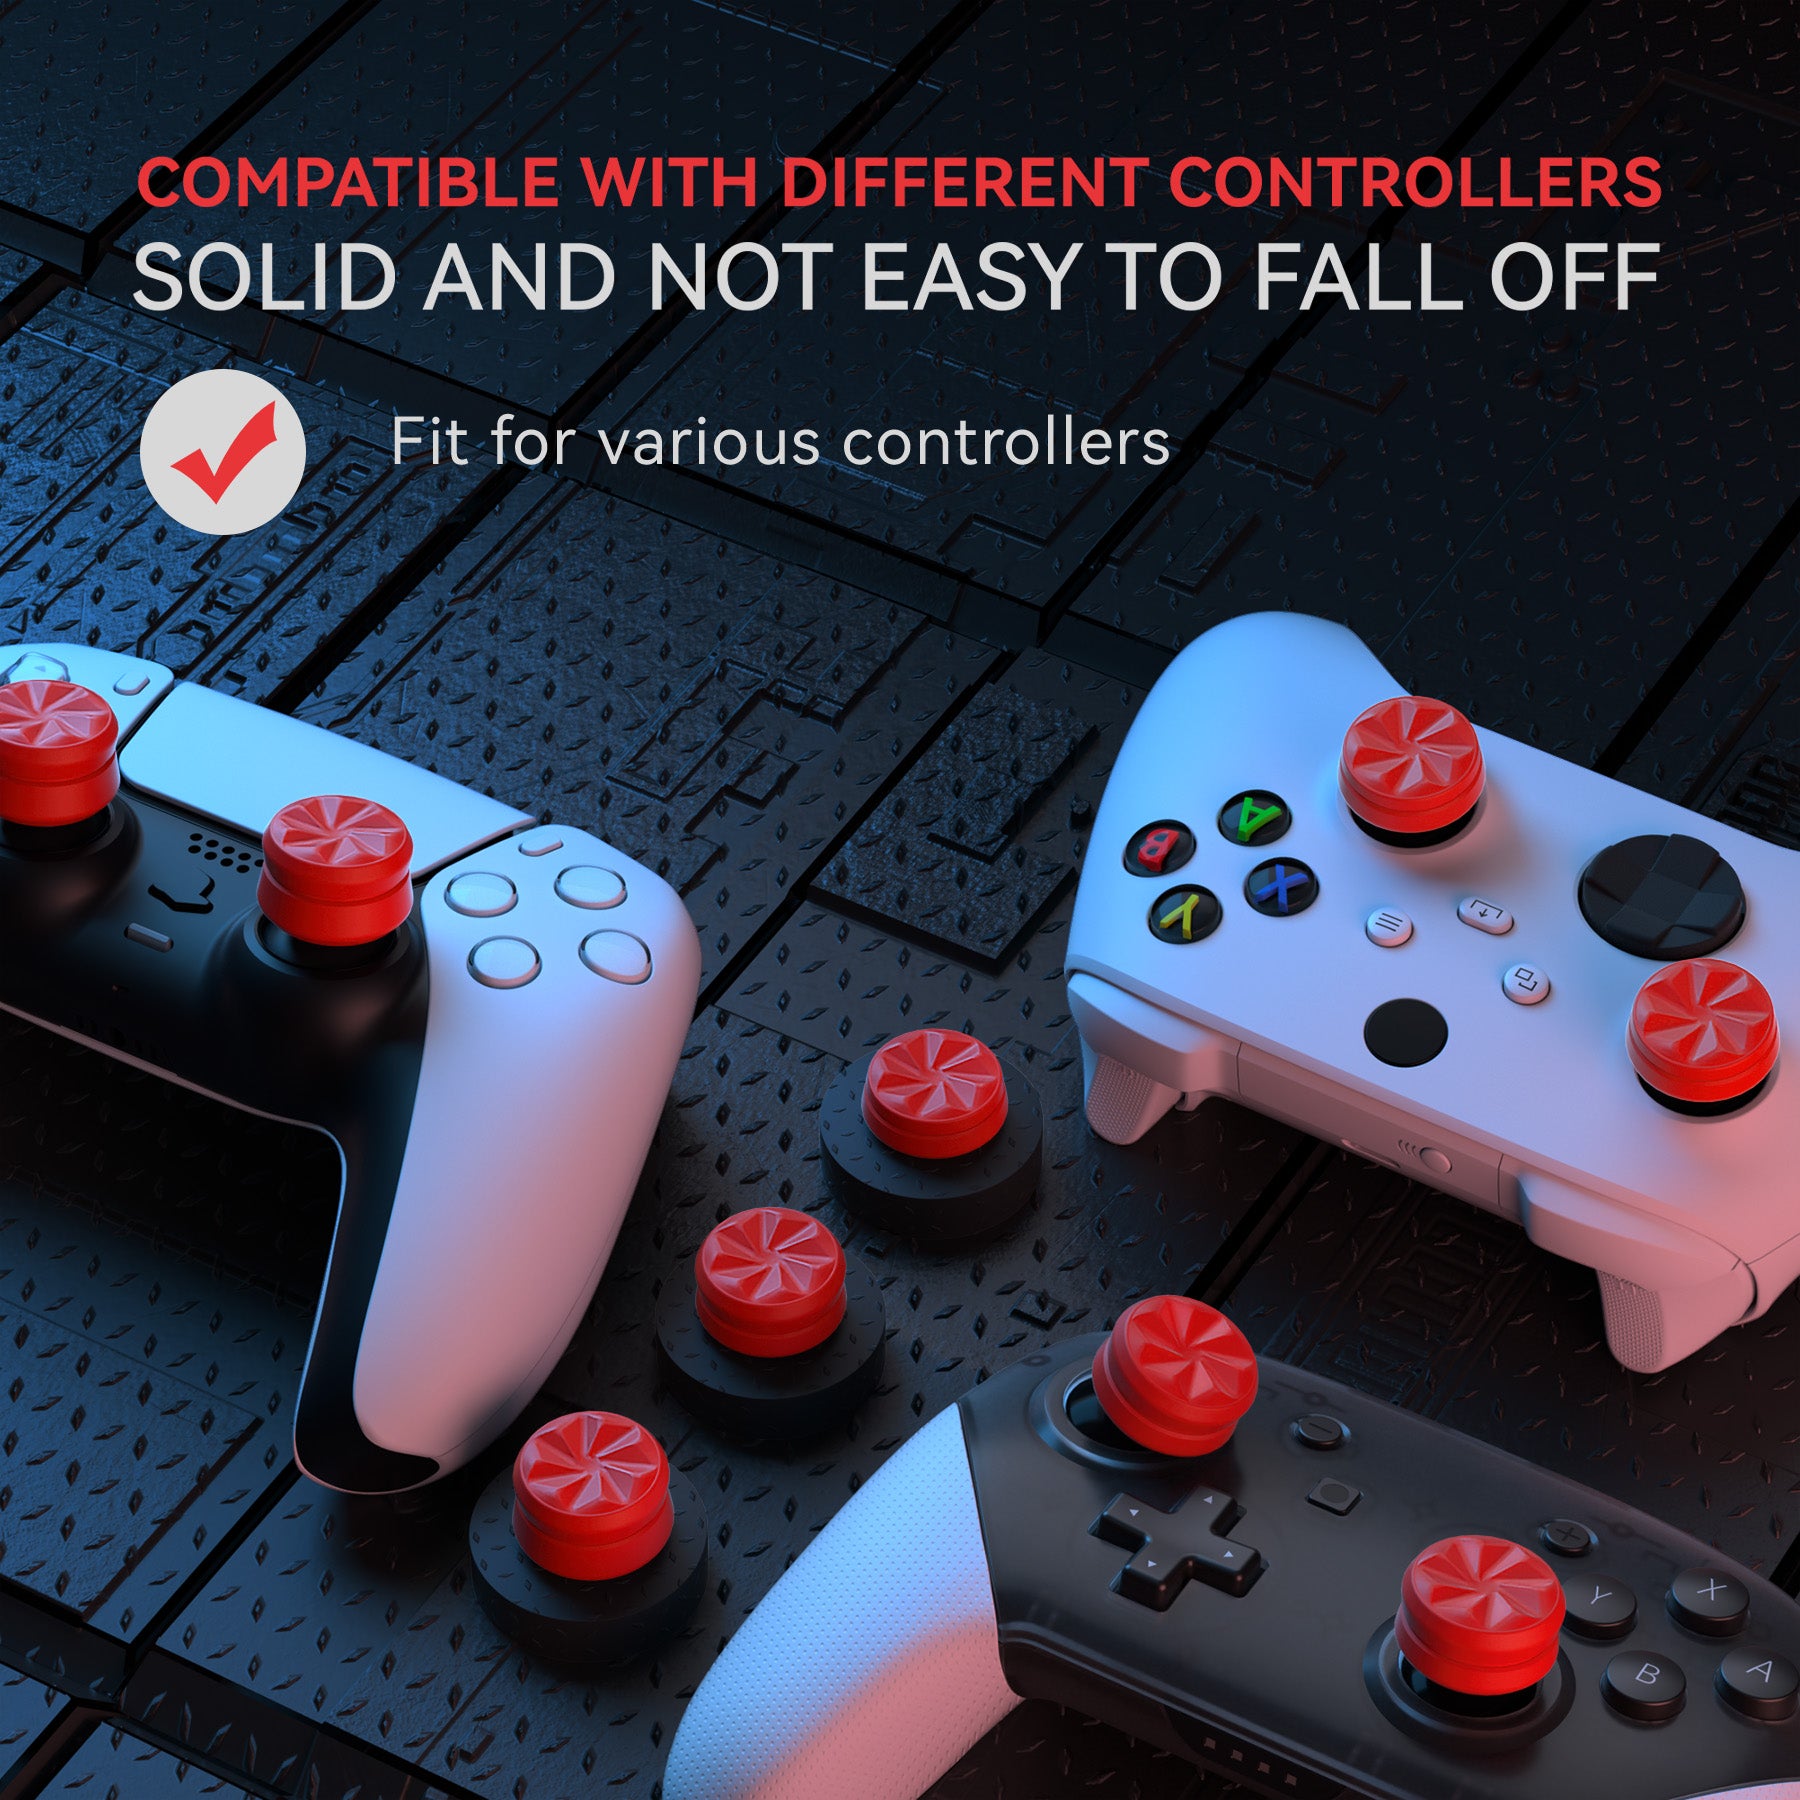 PlayVital 3 Height Hurricane Thumbs Cushion Caps Thumb Grips for ps5, for ps4, Thumbstick Grip Cover for Xbox Core Wireless Controller, Thumb Grips for Xbox One, Elite Series 2, for Switch Pro - Passion Red - PJM3066 PlayVital